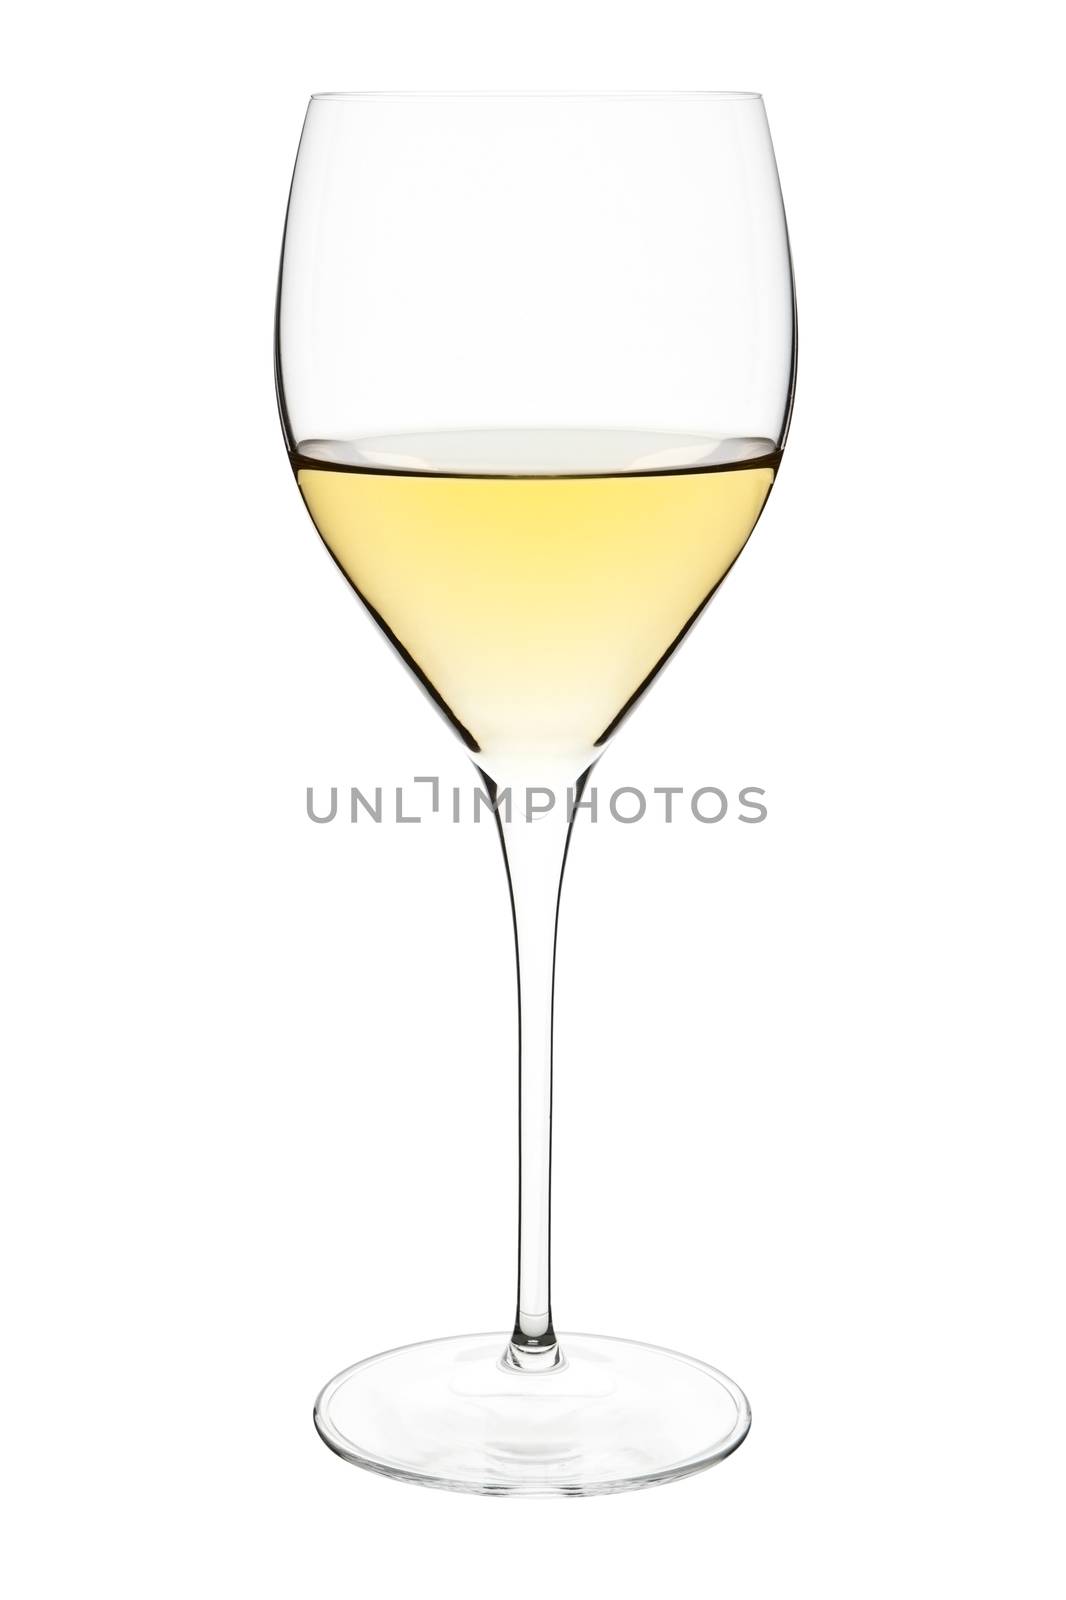 Wine glass with white wine isolated on white background with clipping path.